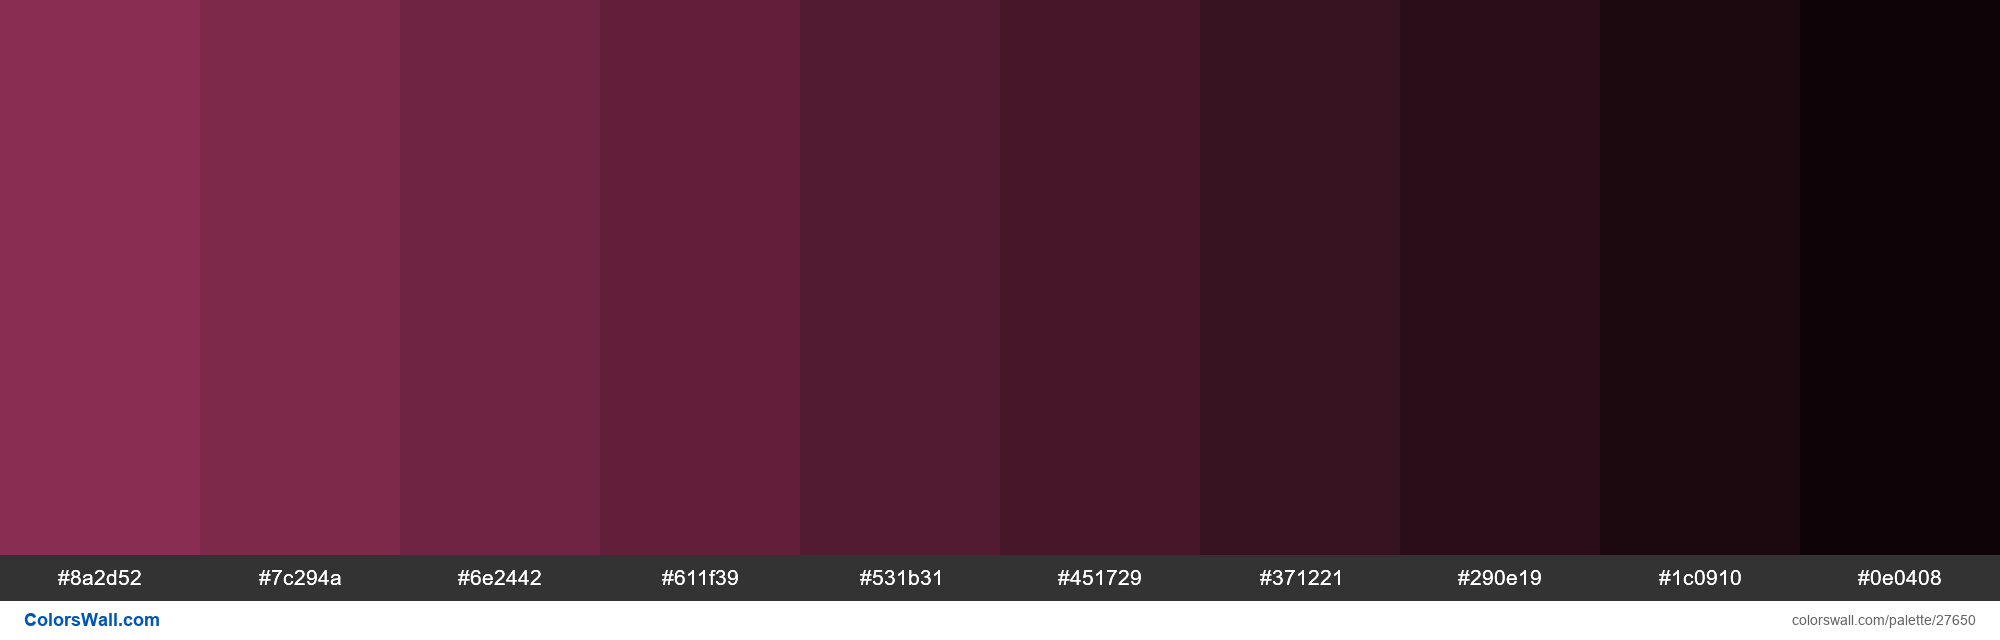 colorswall on X: Shades of Rose Bud Cherry color #8A2D52 hex #8a2d52,  #7c294a, #6e2442, #611f39, #531b31, #451729, #371221, #290e19, #1c0910,  #0e0408 #colors #palette   /  X